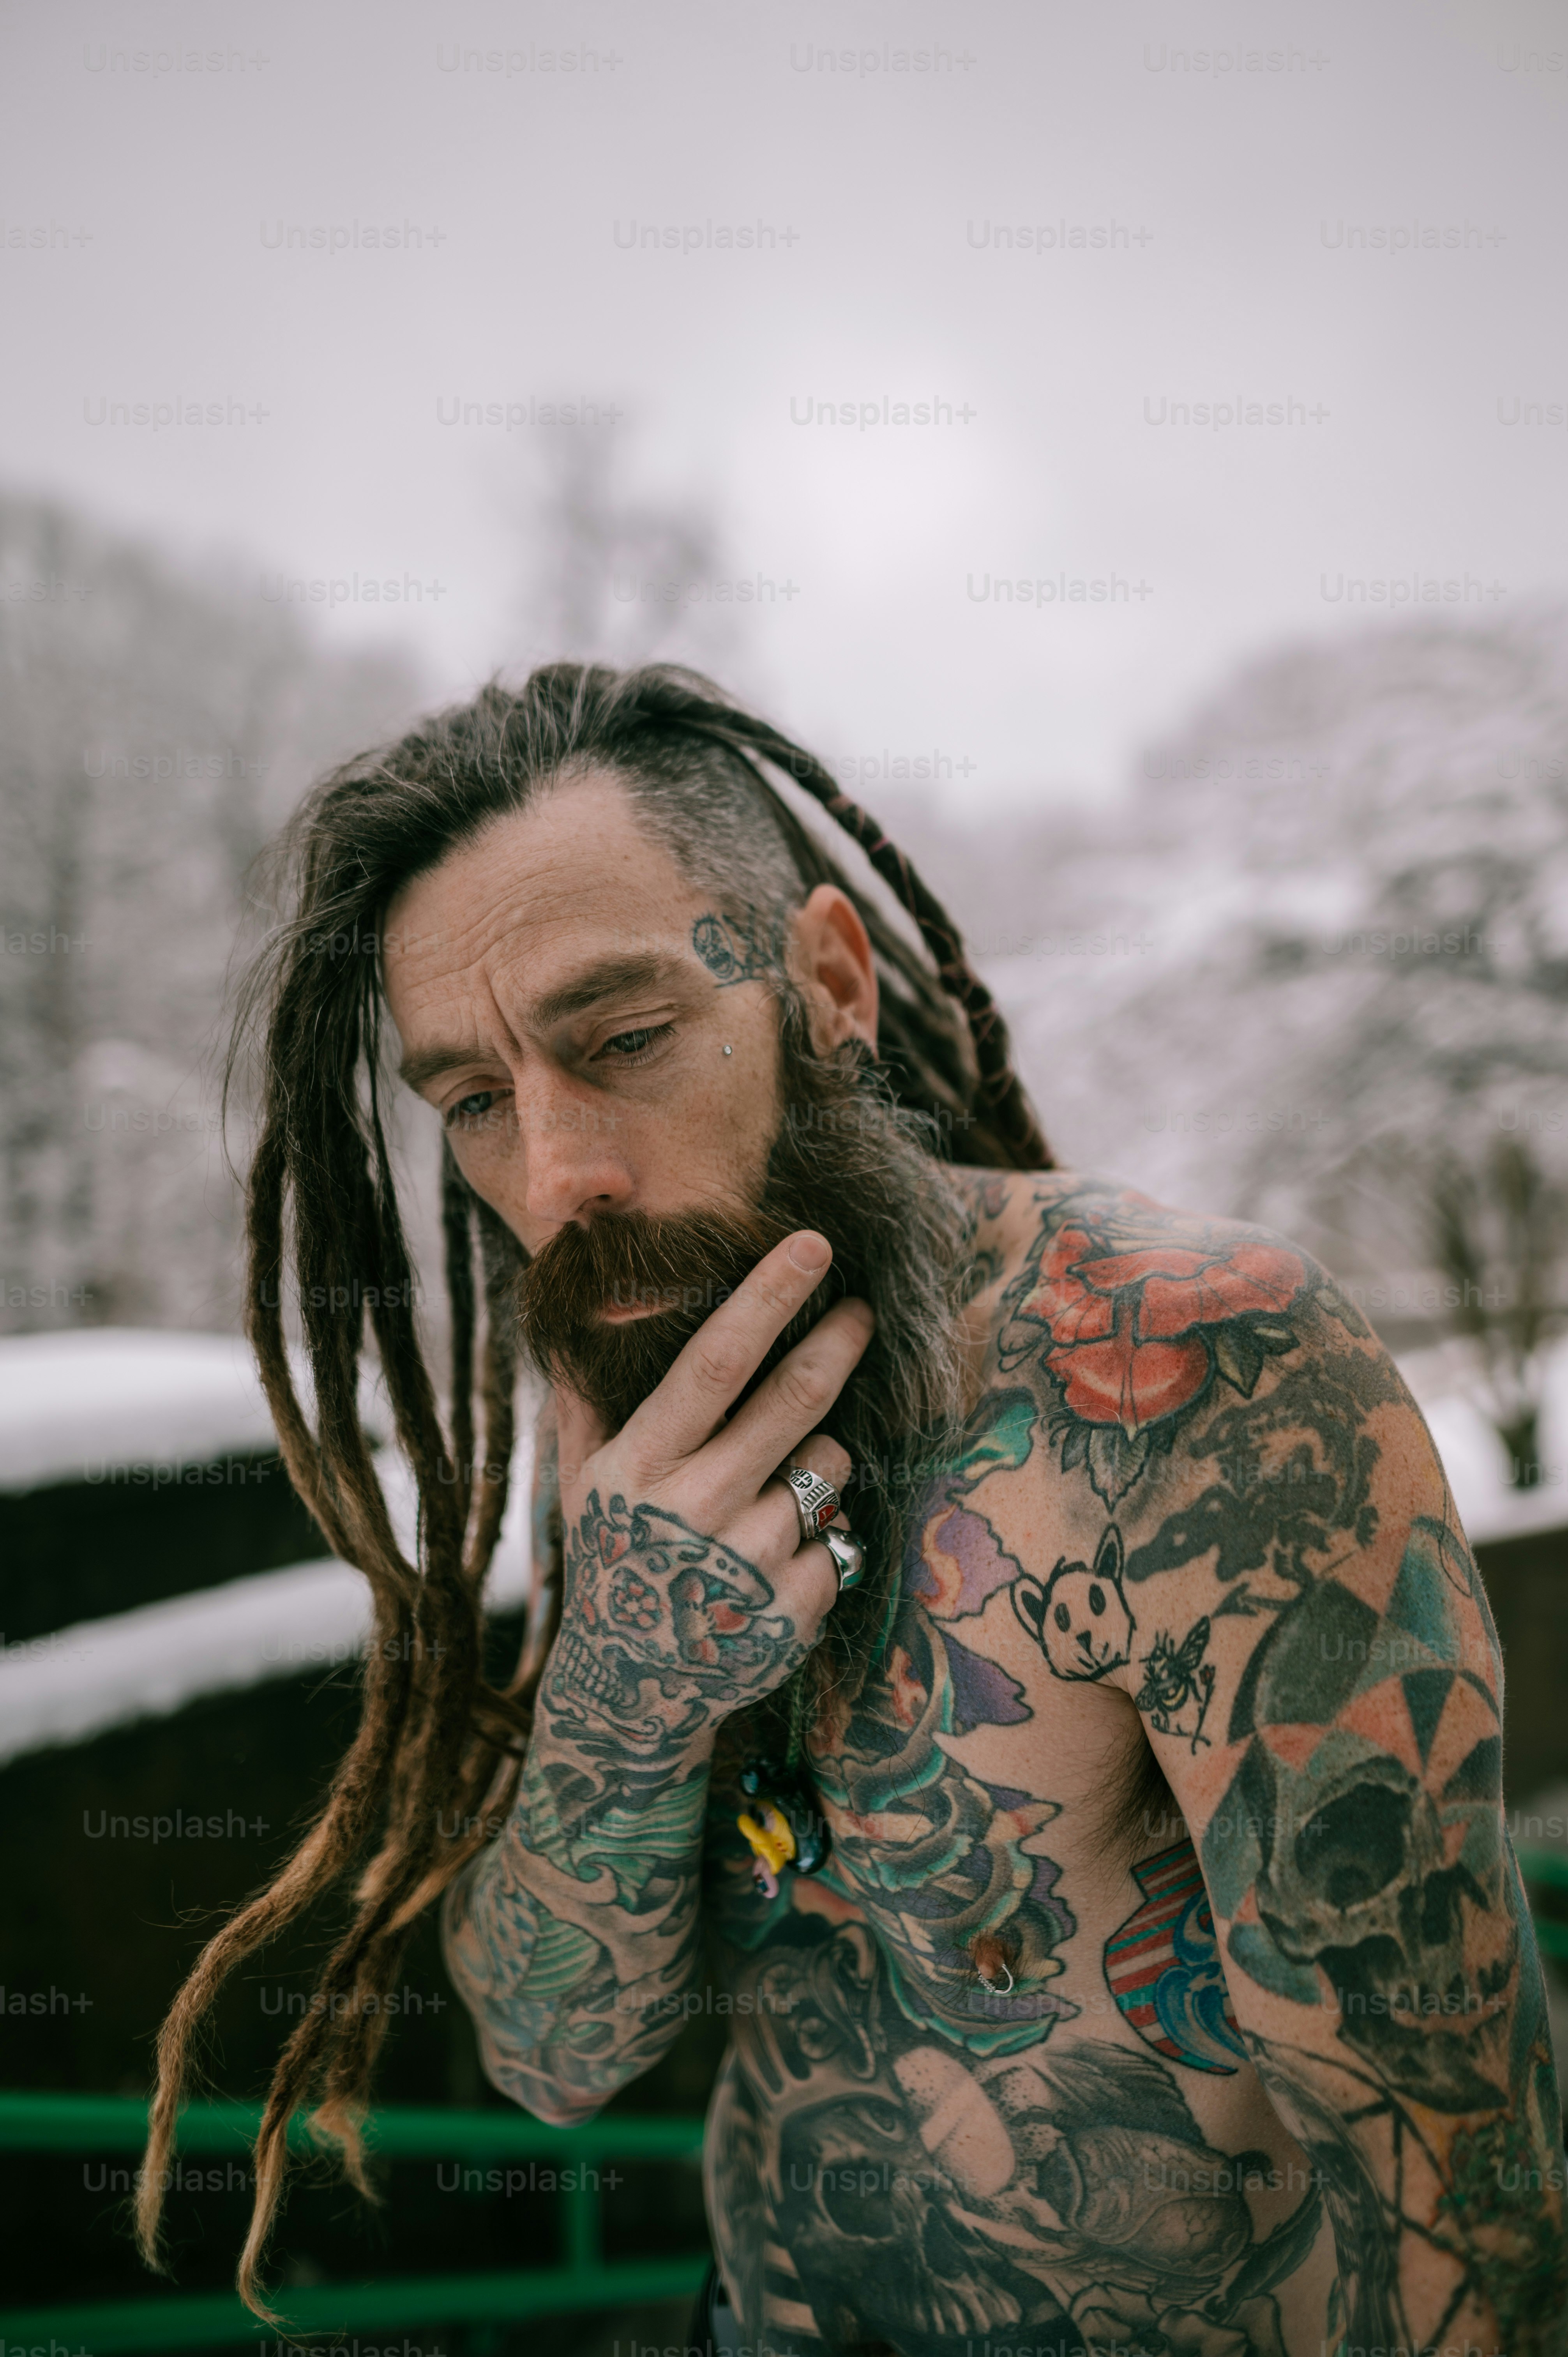 A man with a lot of tattoos on his body photo – Man hair Image on Unsplash